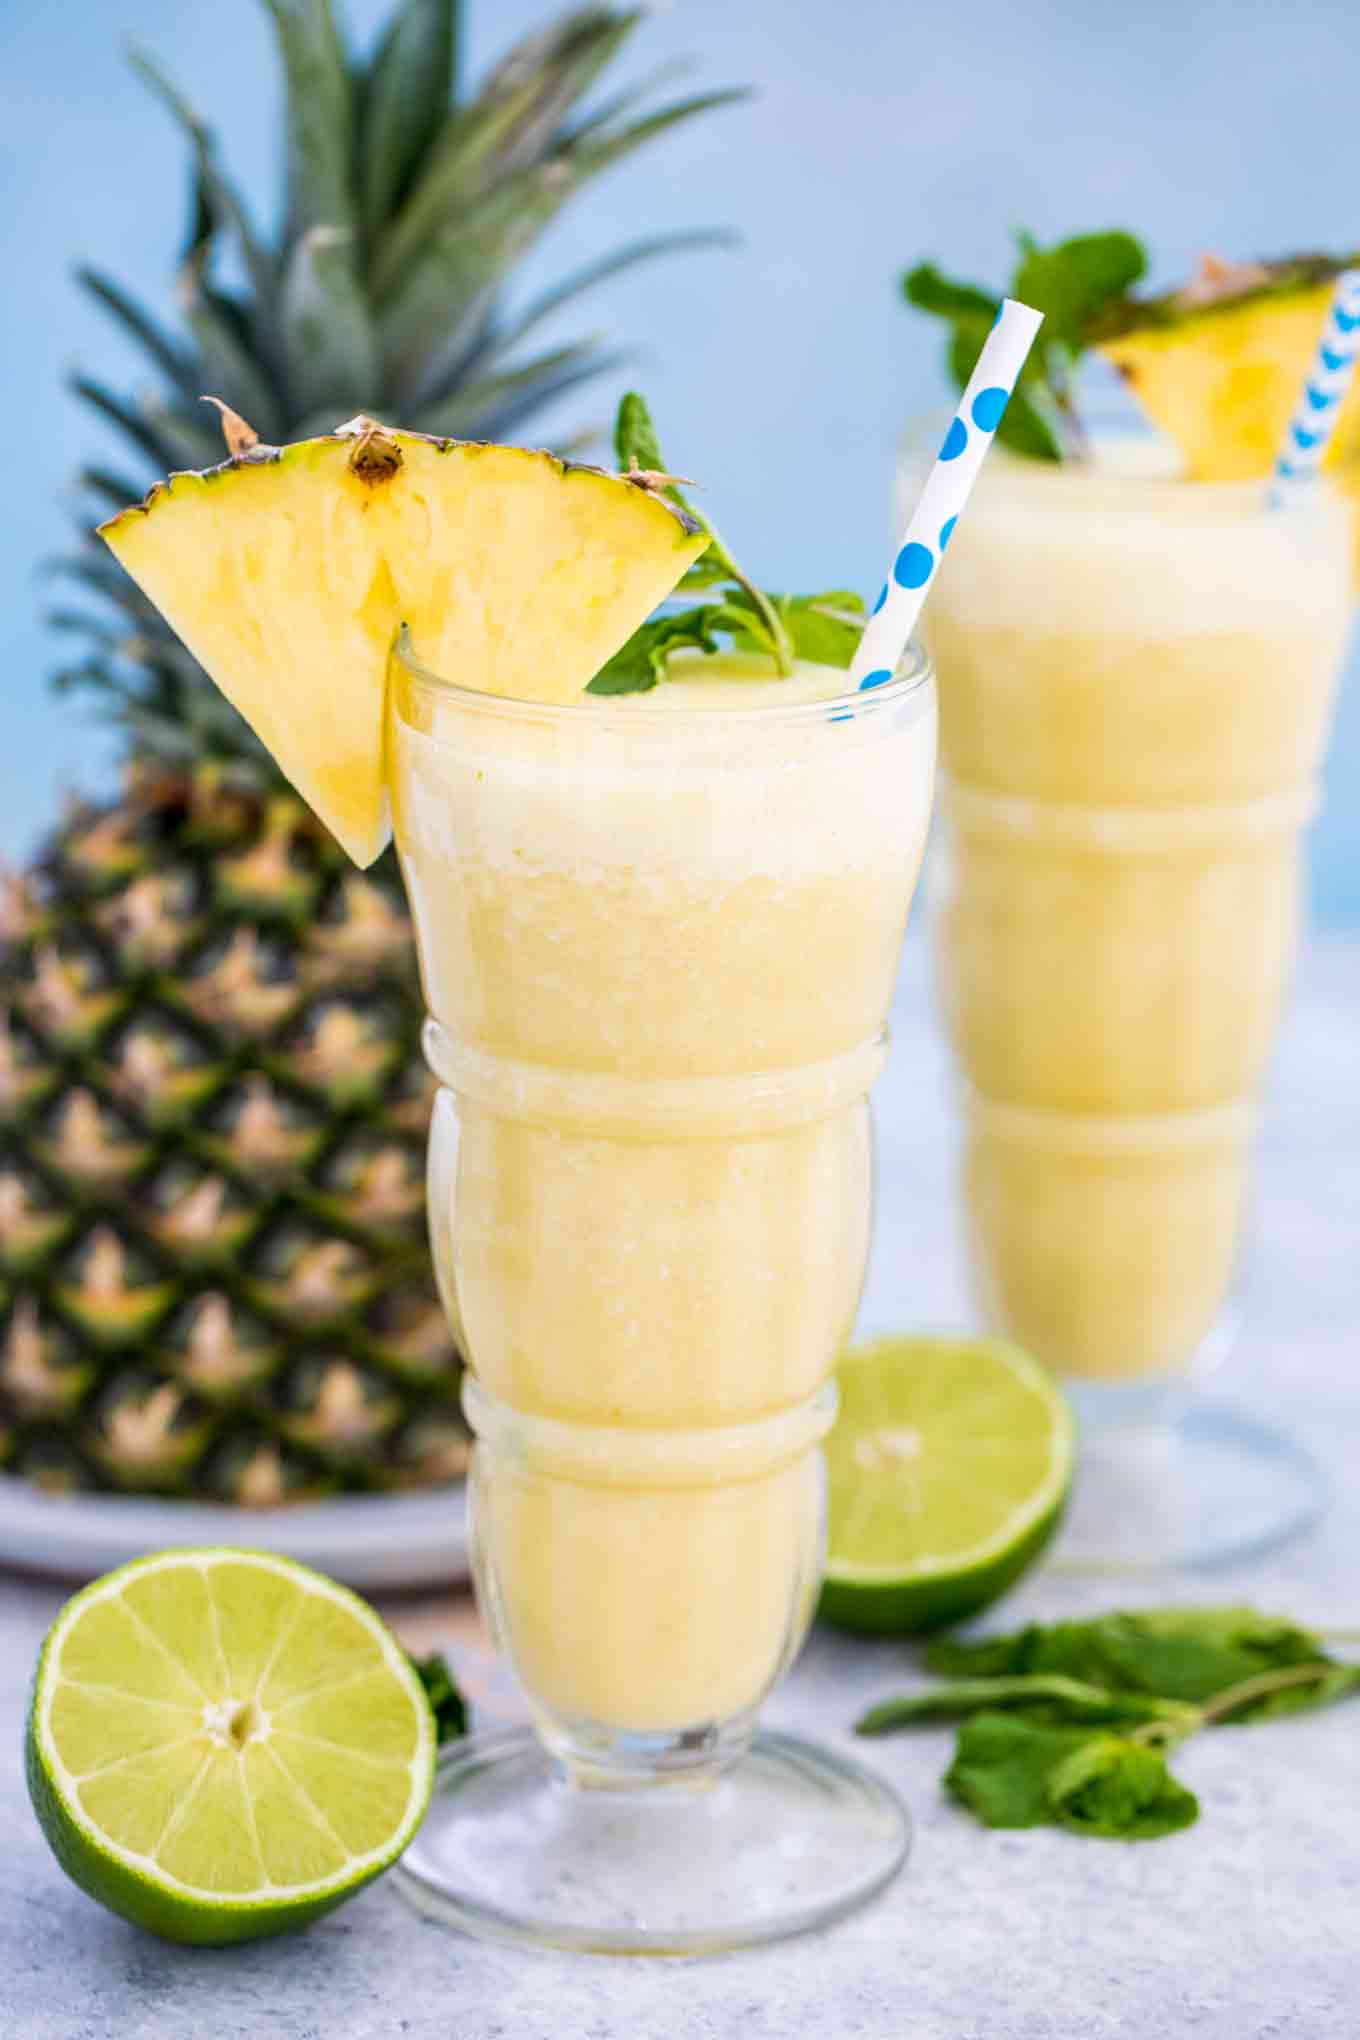 Pineapple Smoothie [Video] - Sweet and Savory Meals